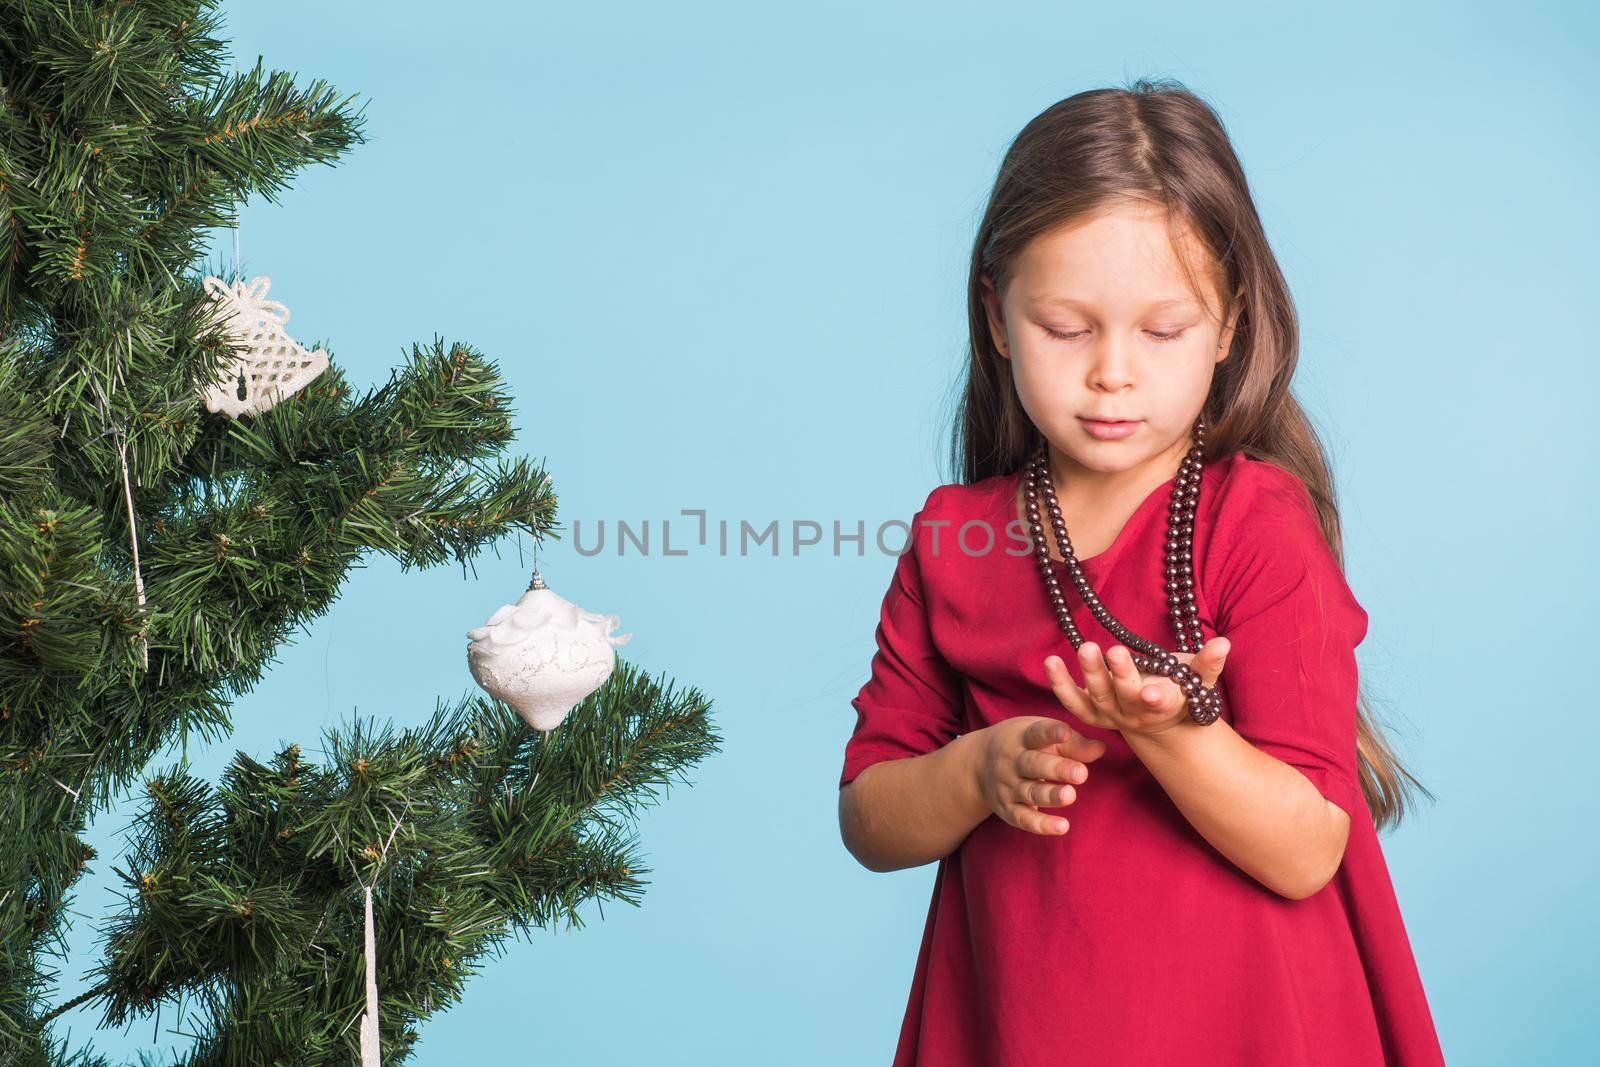 Little girl with christmas tree on blue background.